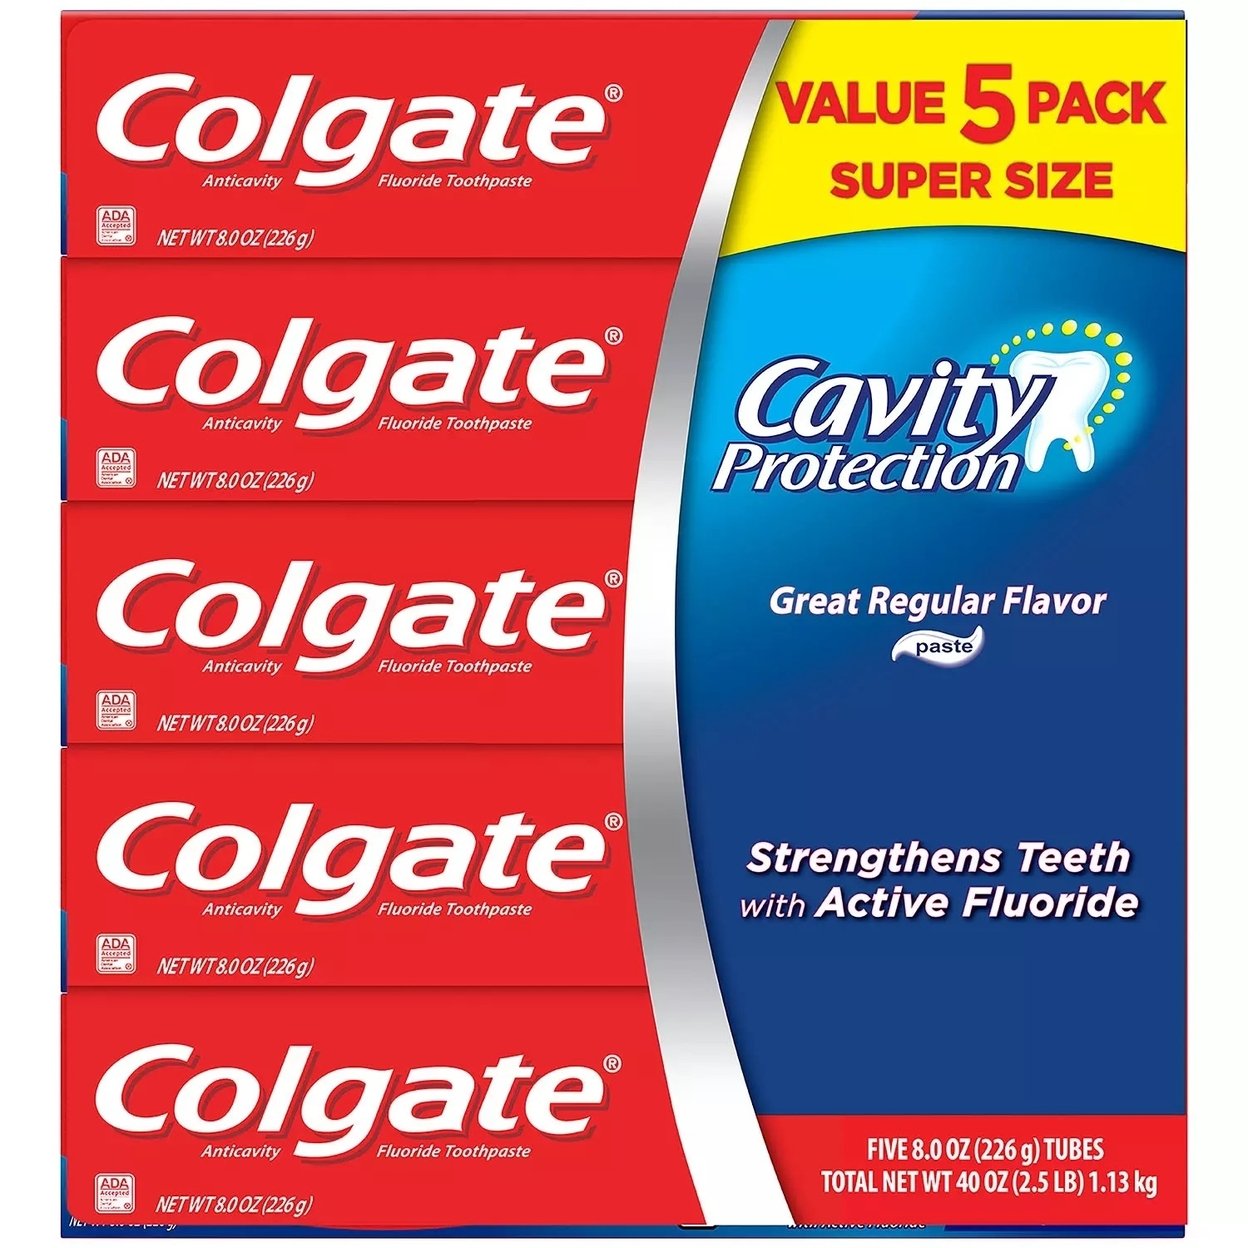 Colgate Cavity Protection Toothpaste With Fluoride, Regular Flavor, 8oz (5 Pack)